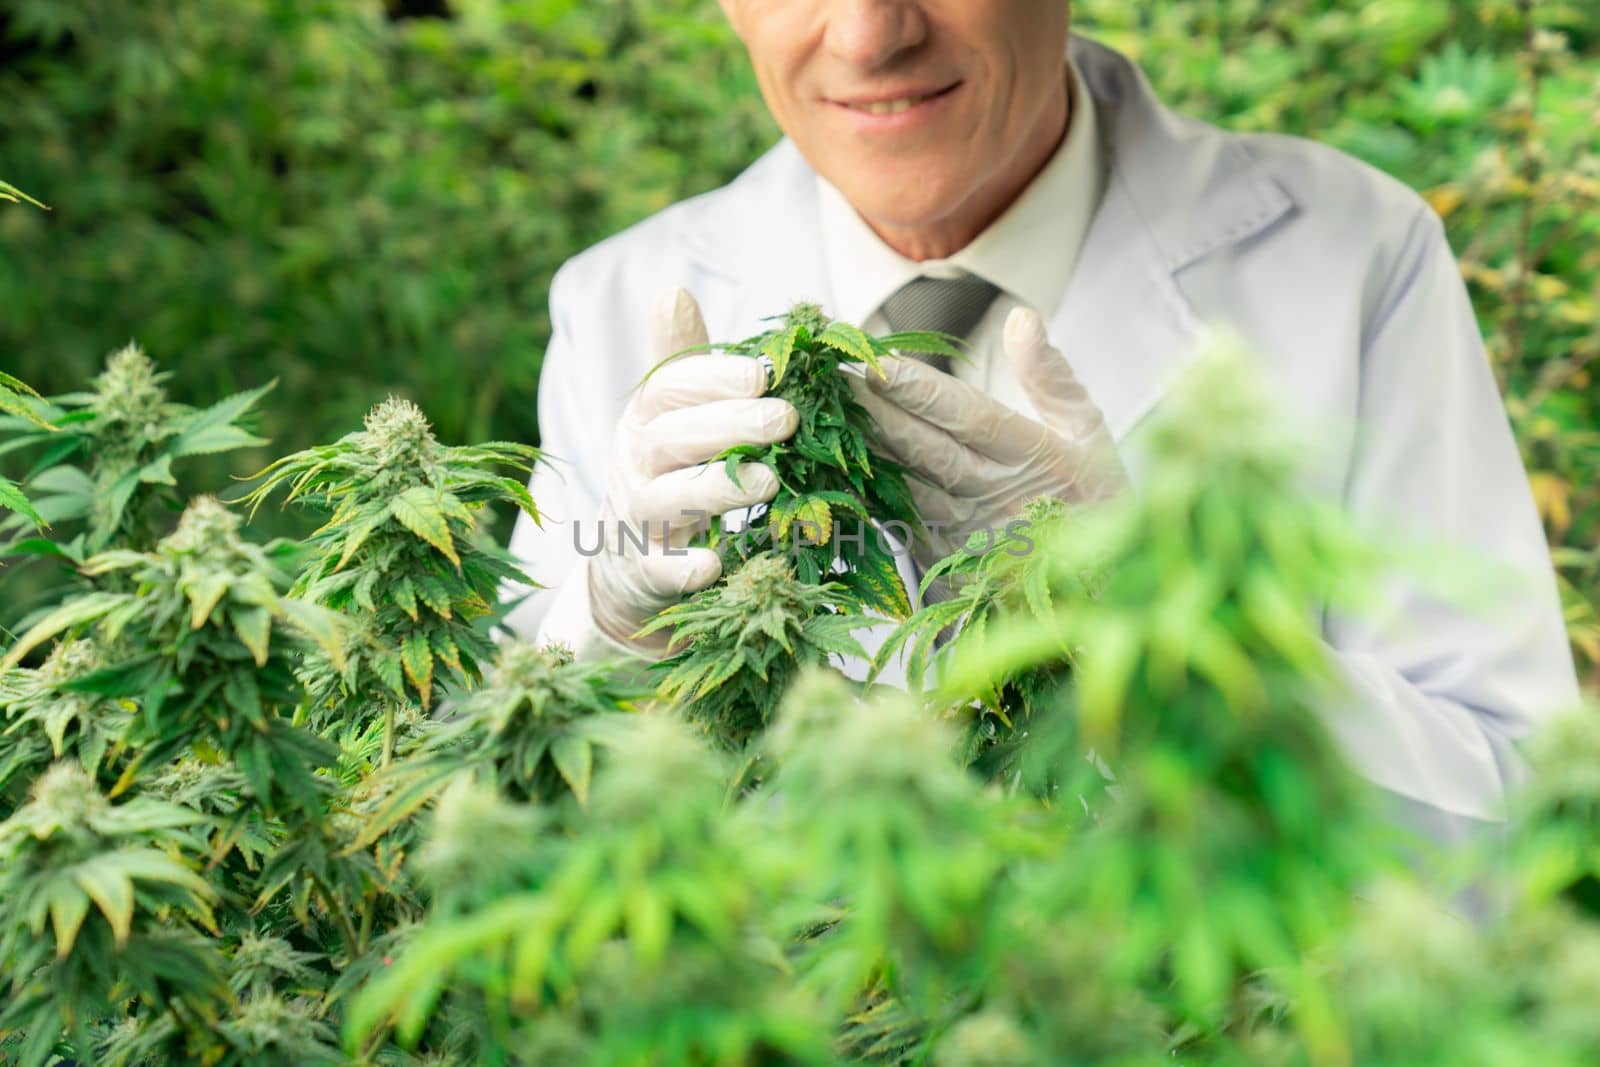 A male scientist inspects the gratifying leaves of cannabis plant. Researcher working on cannabis inspection in grow facility cannabis farm for medicinal cannabis products for medical purposes.